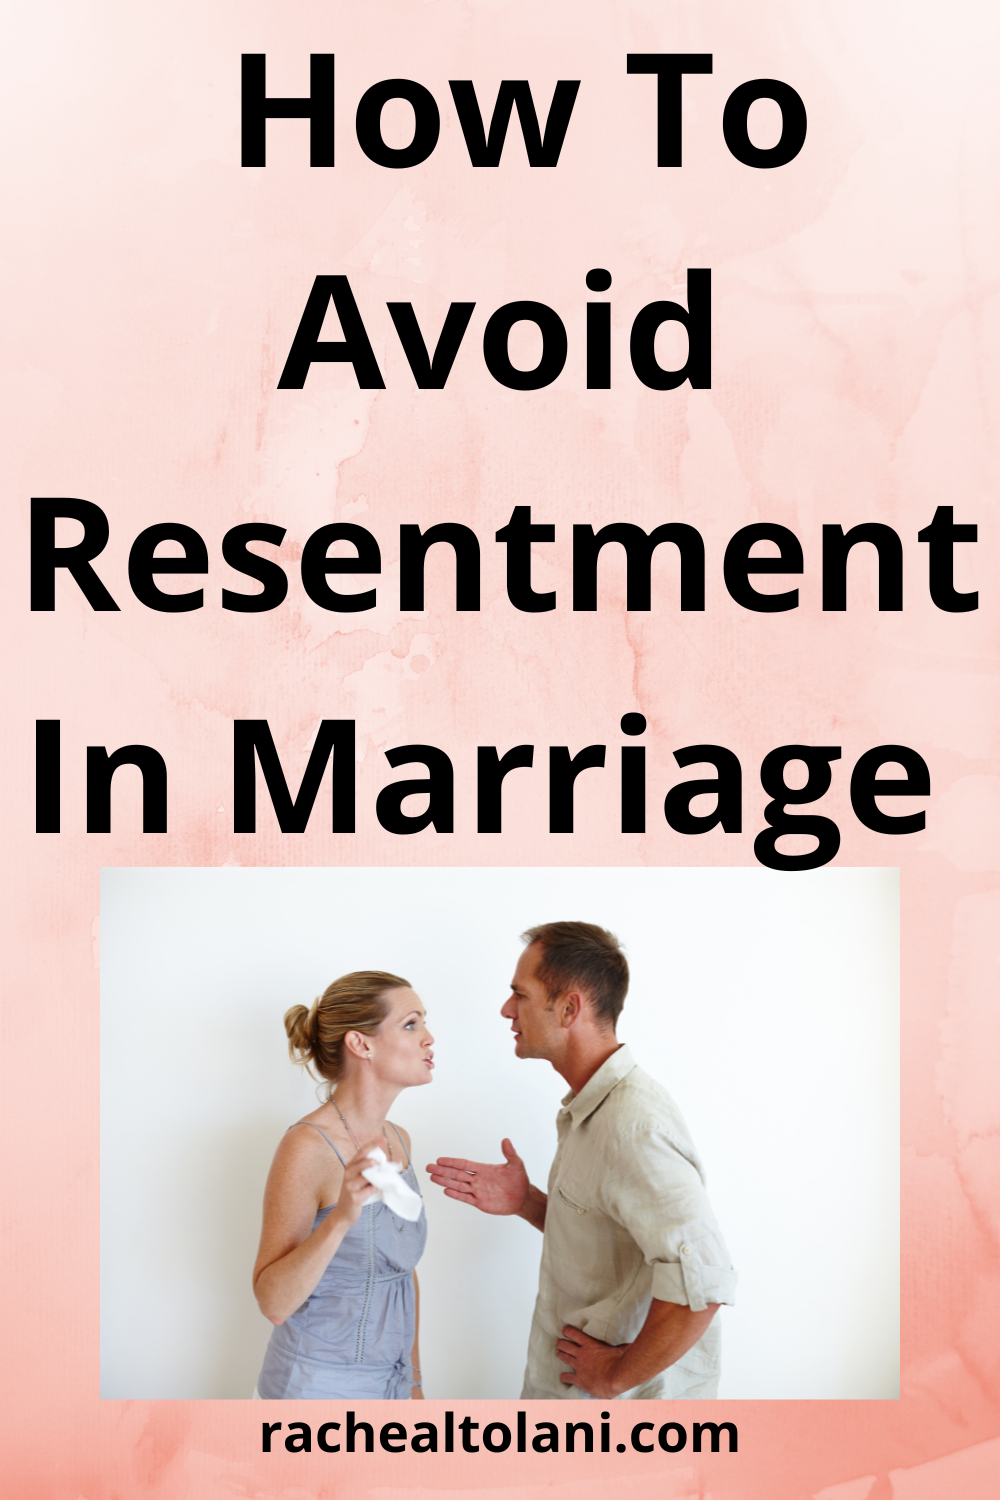 How To Avoid Resentment In Marriage